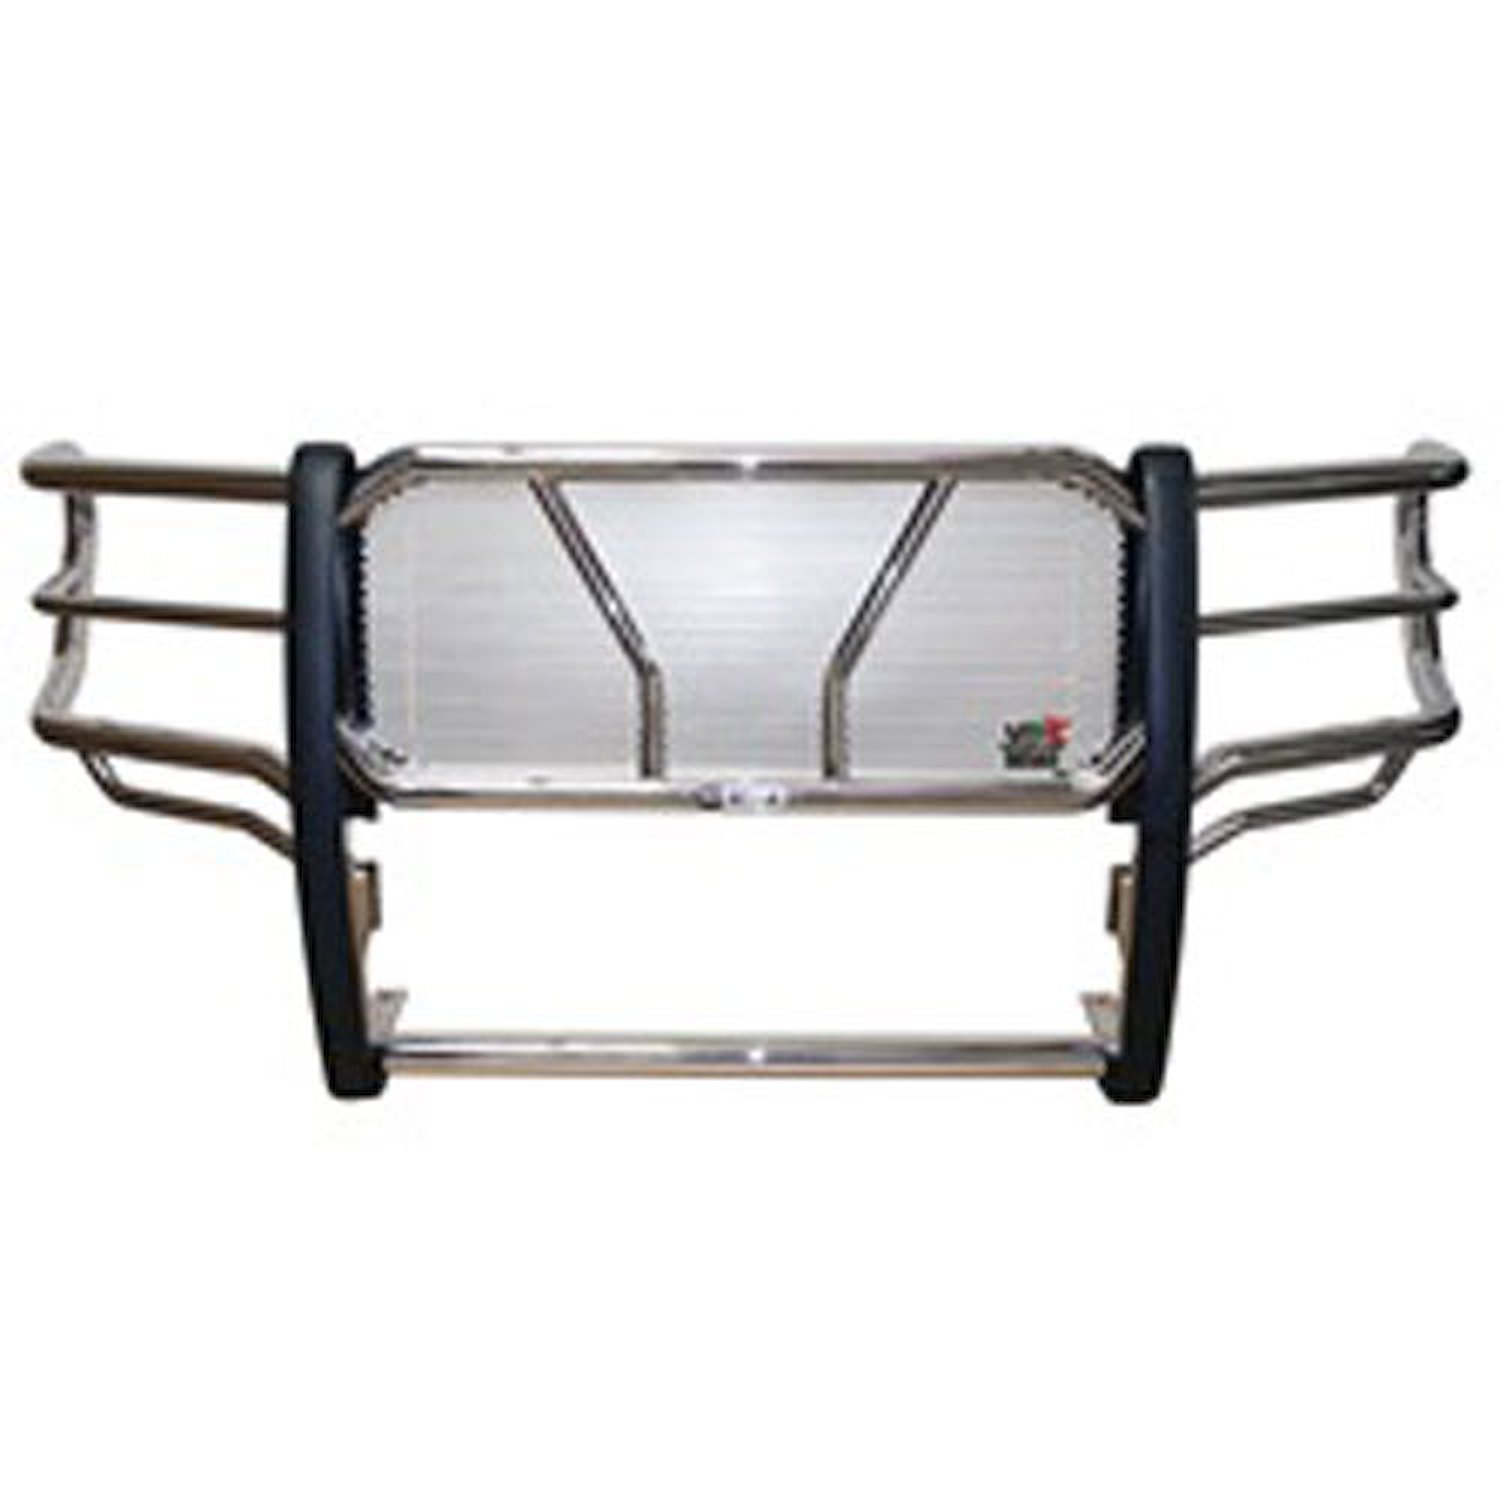 HDX Grille Guard 2009-14 Ford F-150